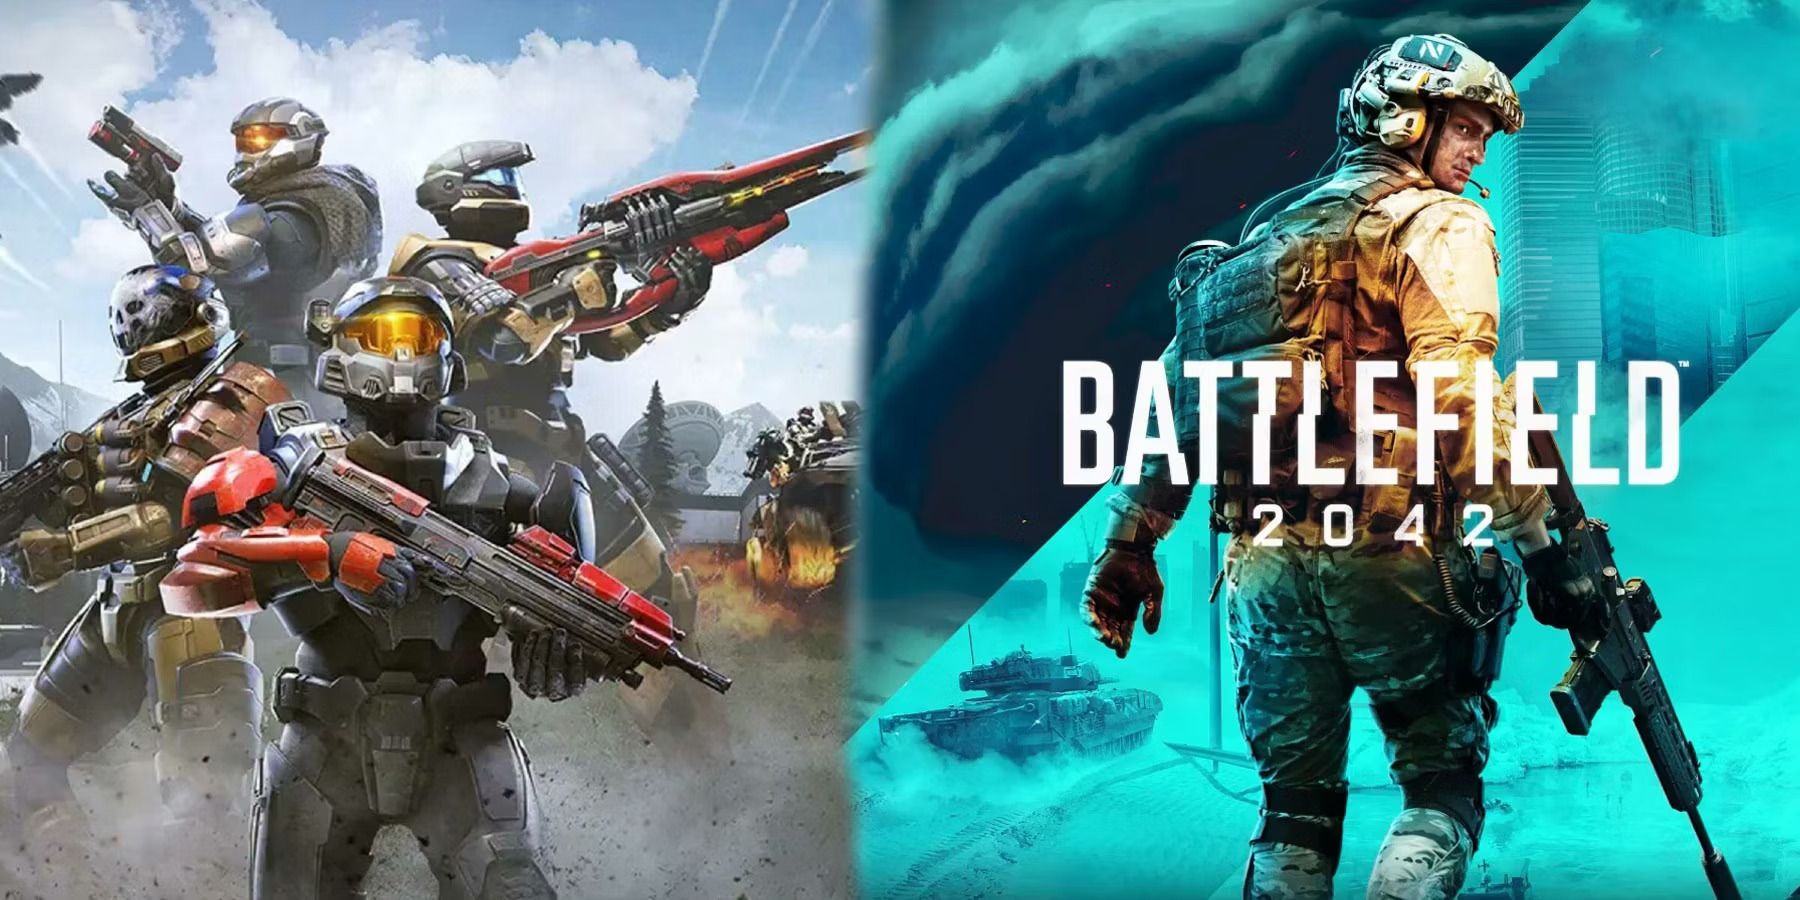 Spartans in Halo Infinite and the Battlefield 2042 logo